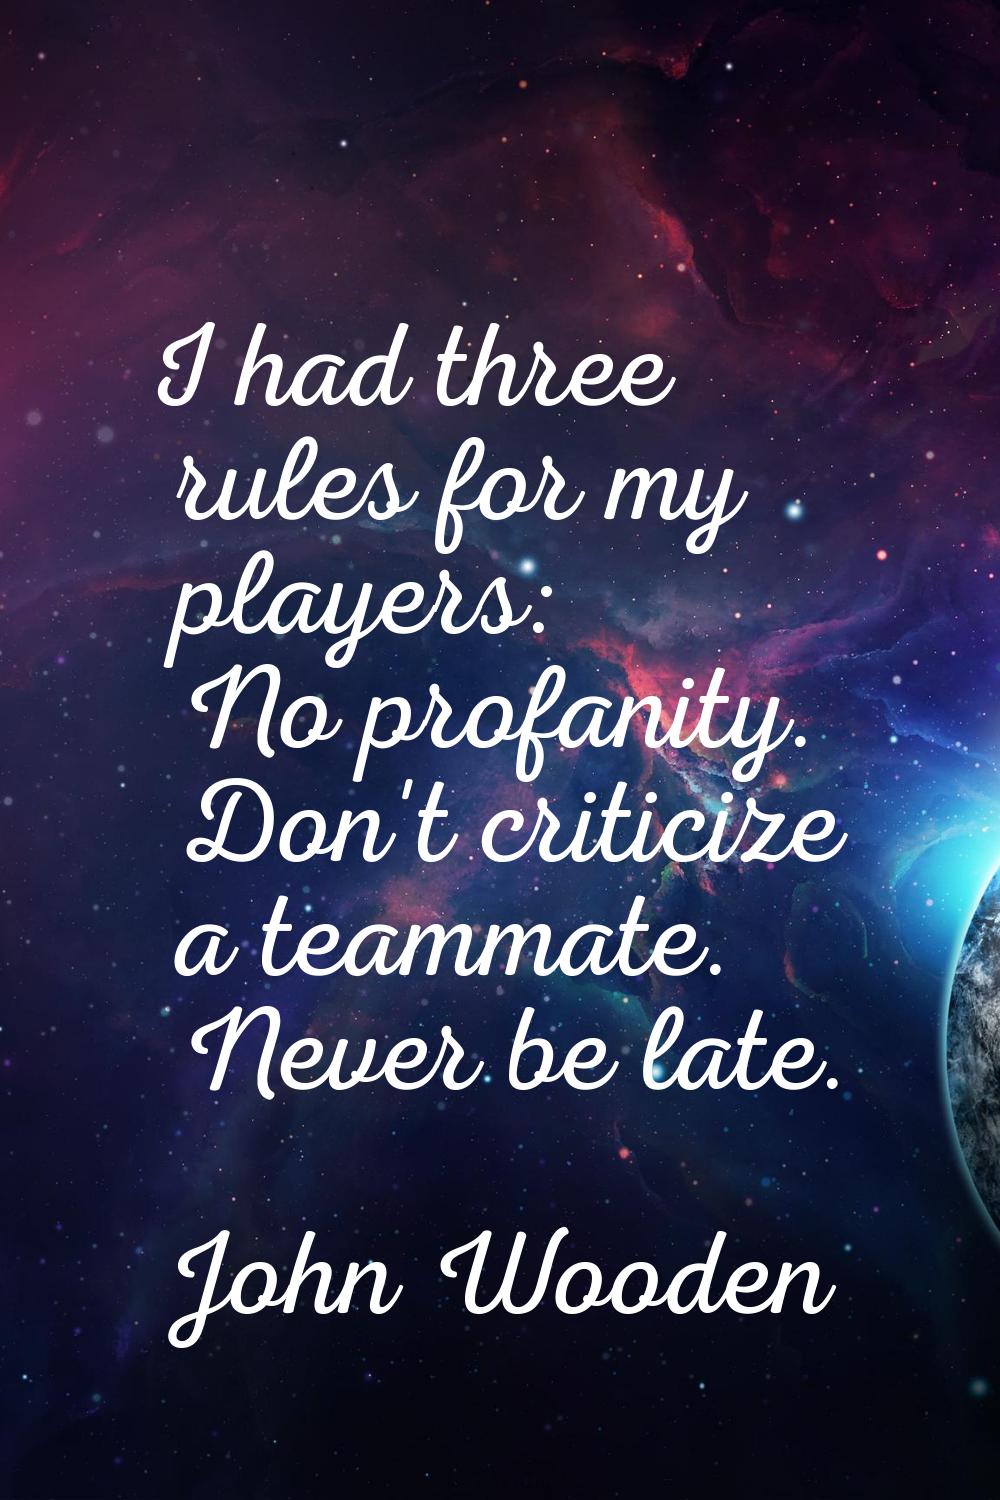 I had three rules for my players: No profanity. Don't criticize a teammate. Never be late.